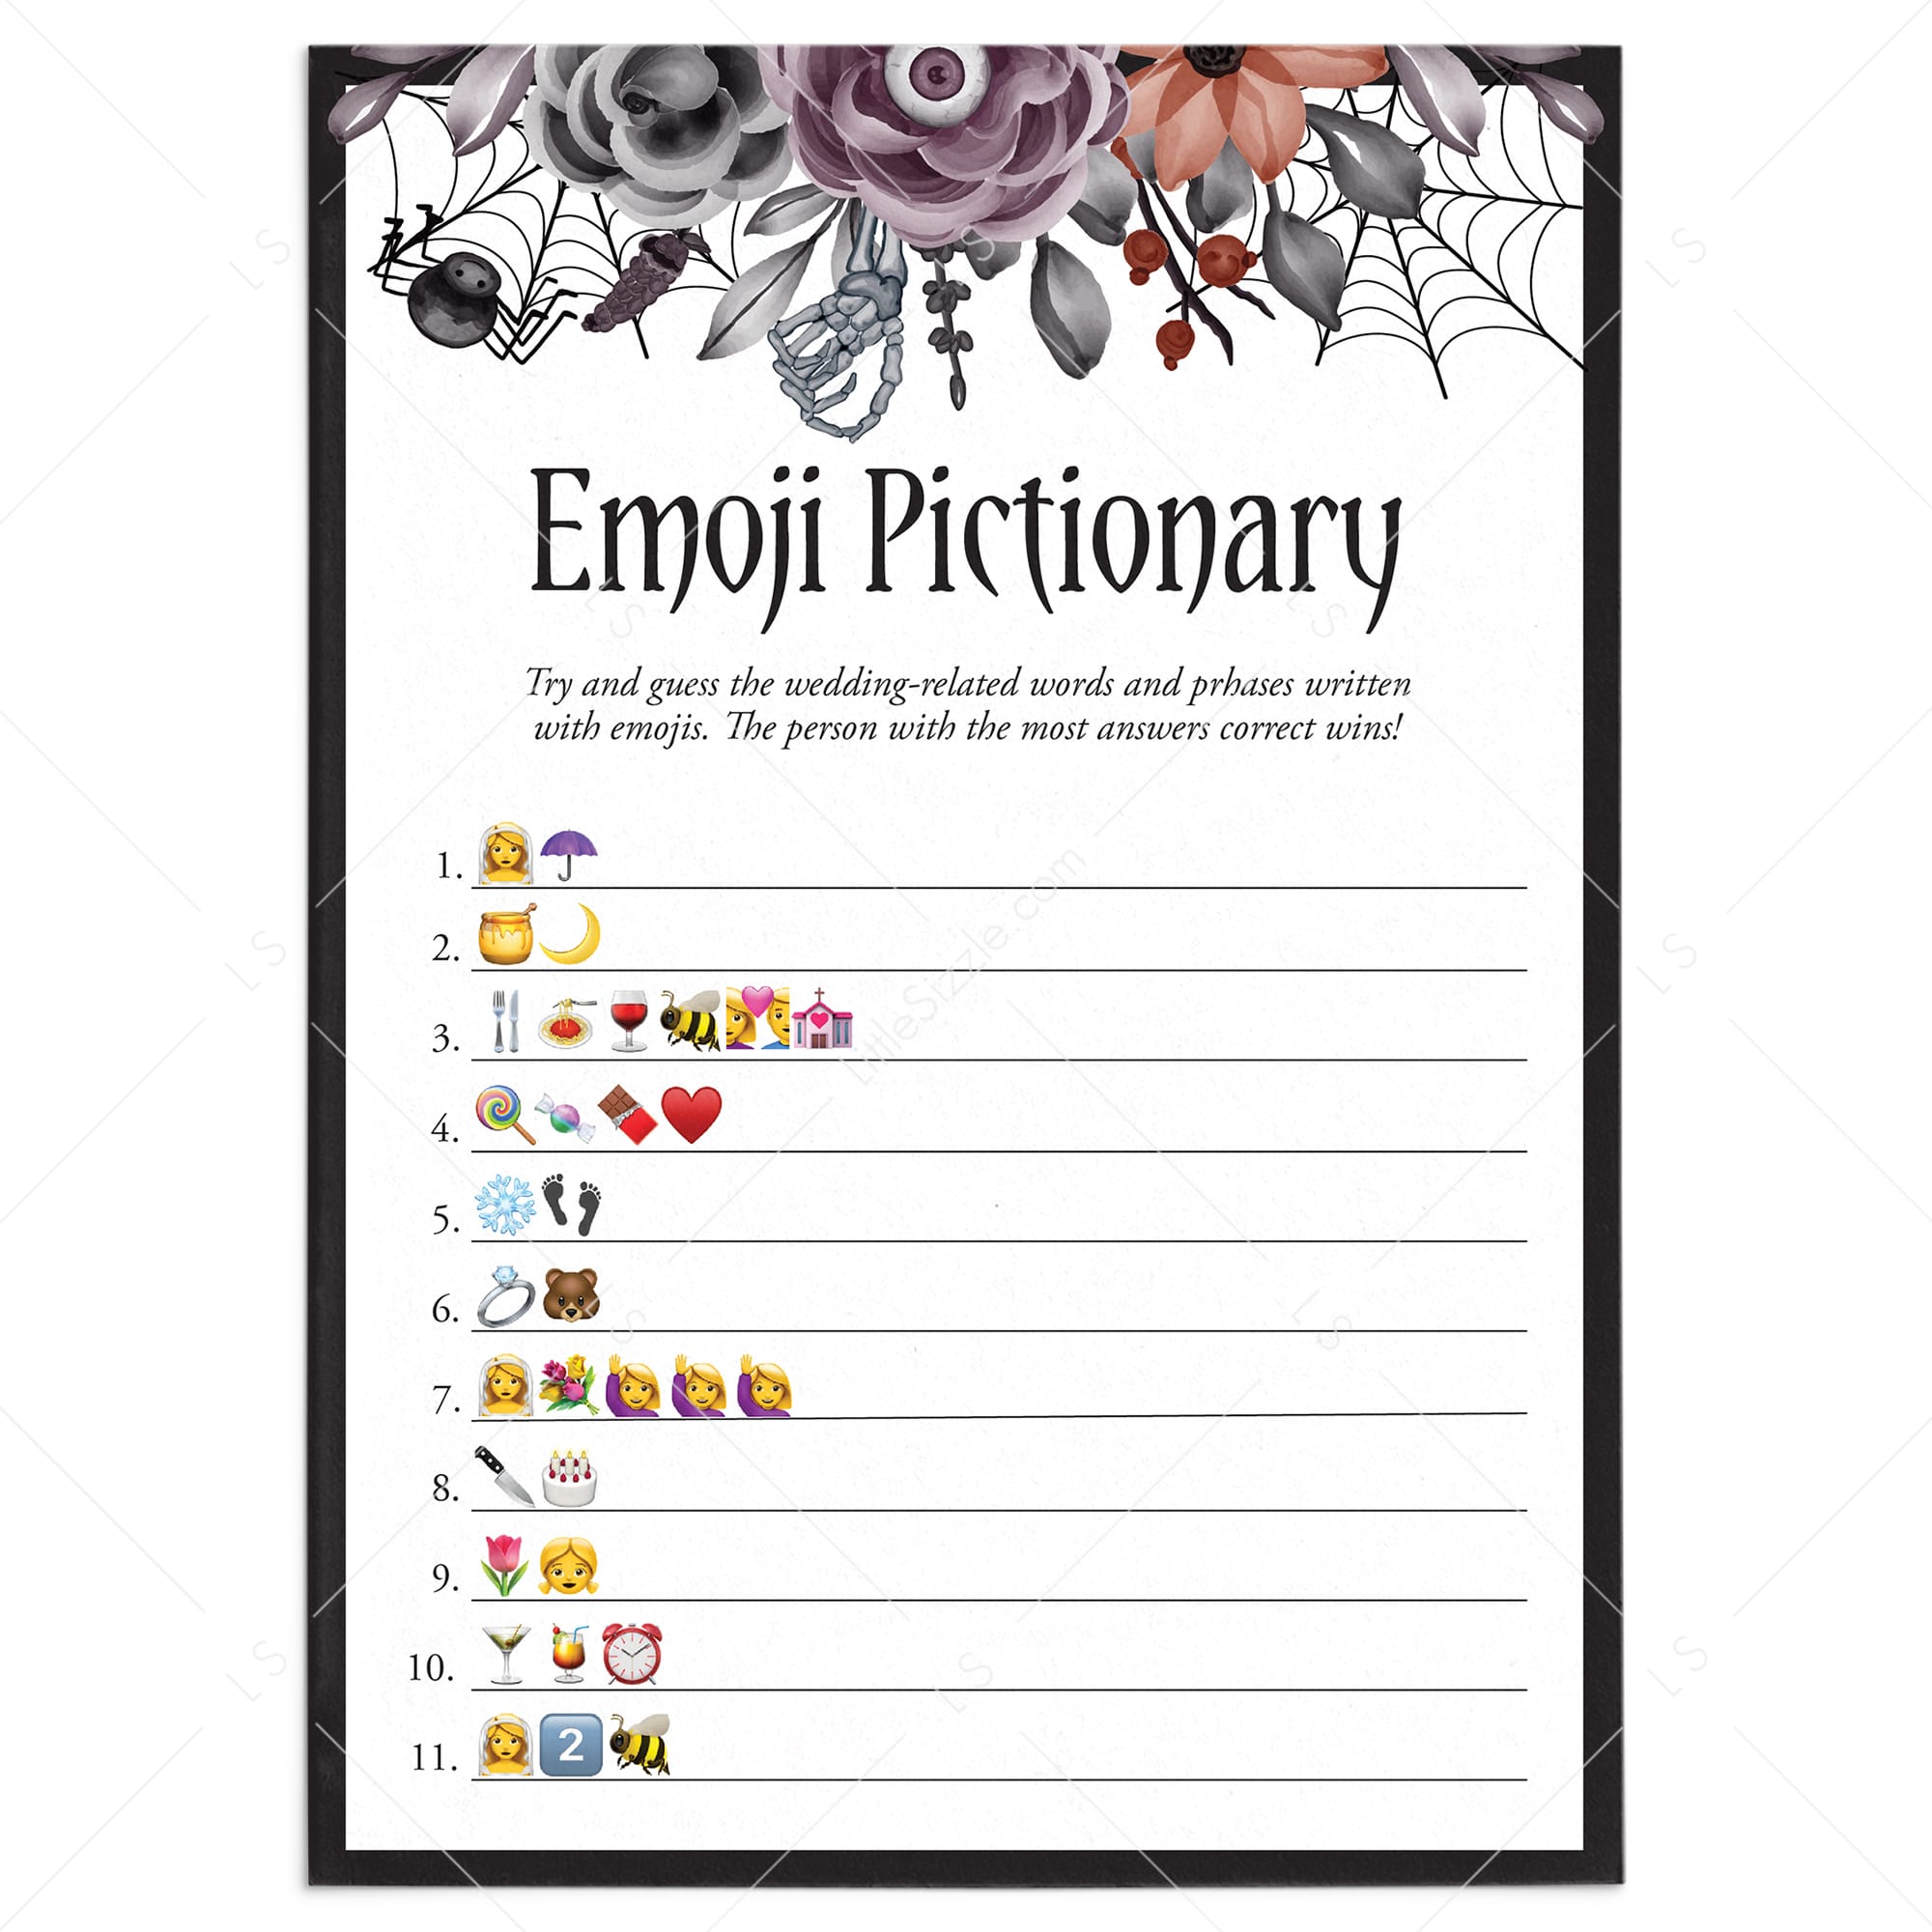 Gothic Bridal Shower Game Emoji Pictionary with Answers Printable by LittleSizzle